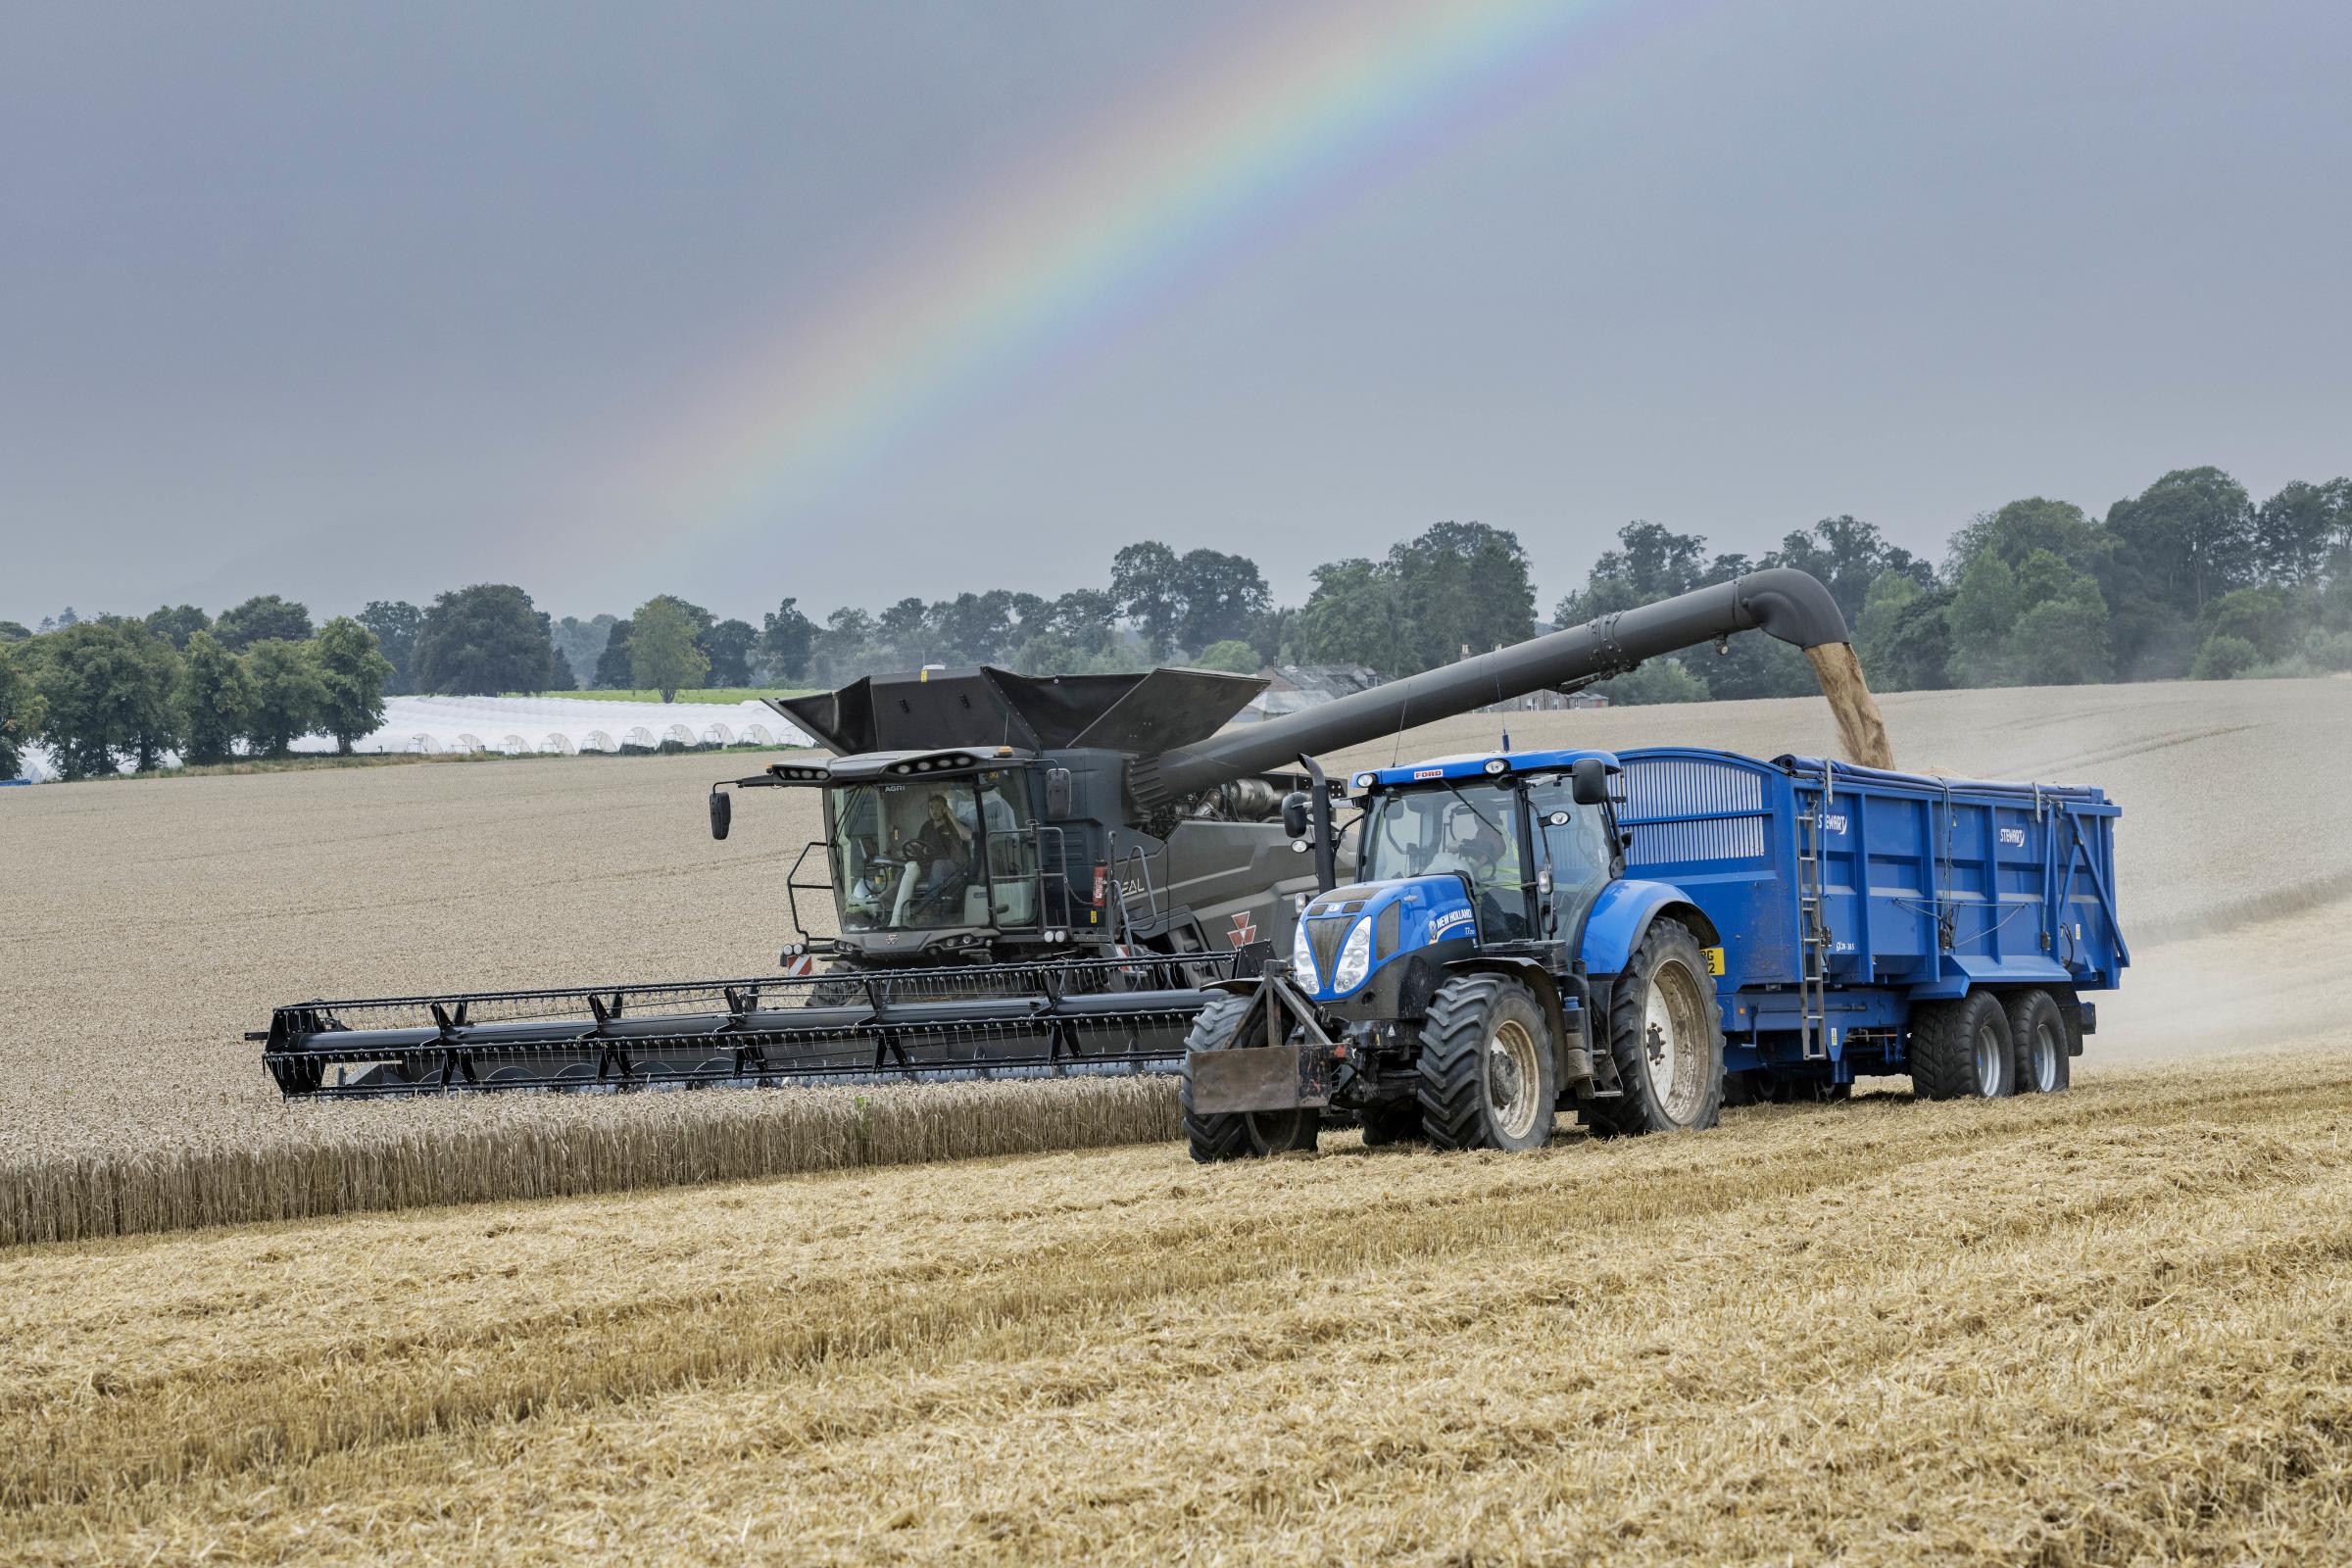 THE end of the harvest at Grewar Farming, Ardler, Perthshire, as this demonstrator MF Ideal Combine takes out the last crop of wheat at Knollhead Farm (Pic Ron Stephen)